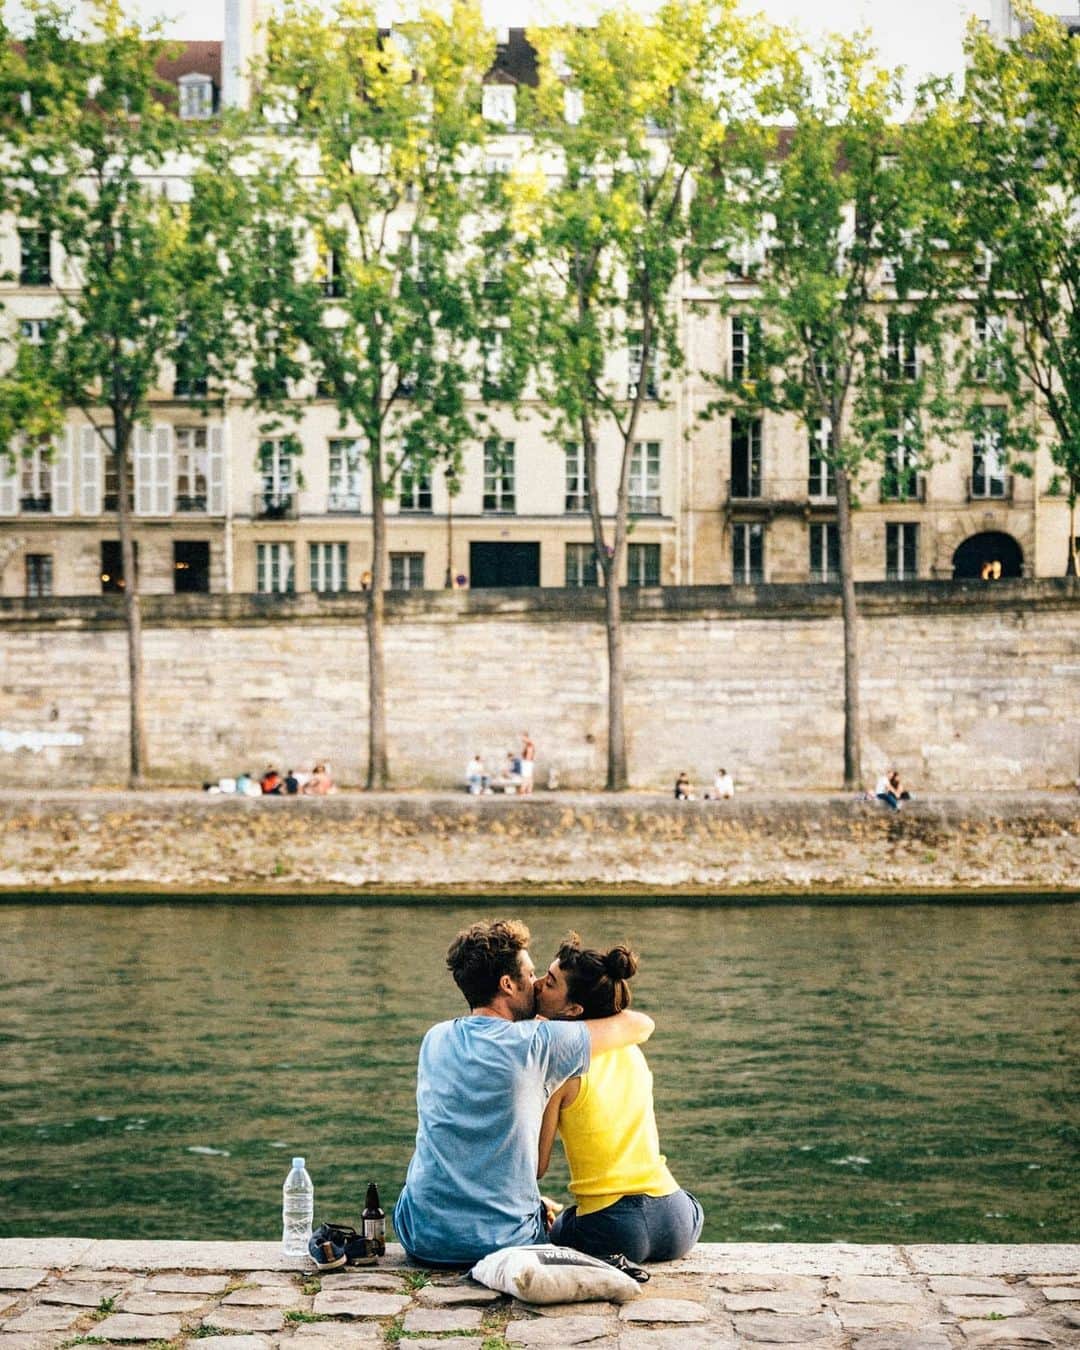 VuTheara Khamのインスタグラム：「Parisian Vibes, Paris, 2020 💙💛💚 It's a series of pictures taken yesterday along the Seine river.」